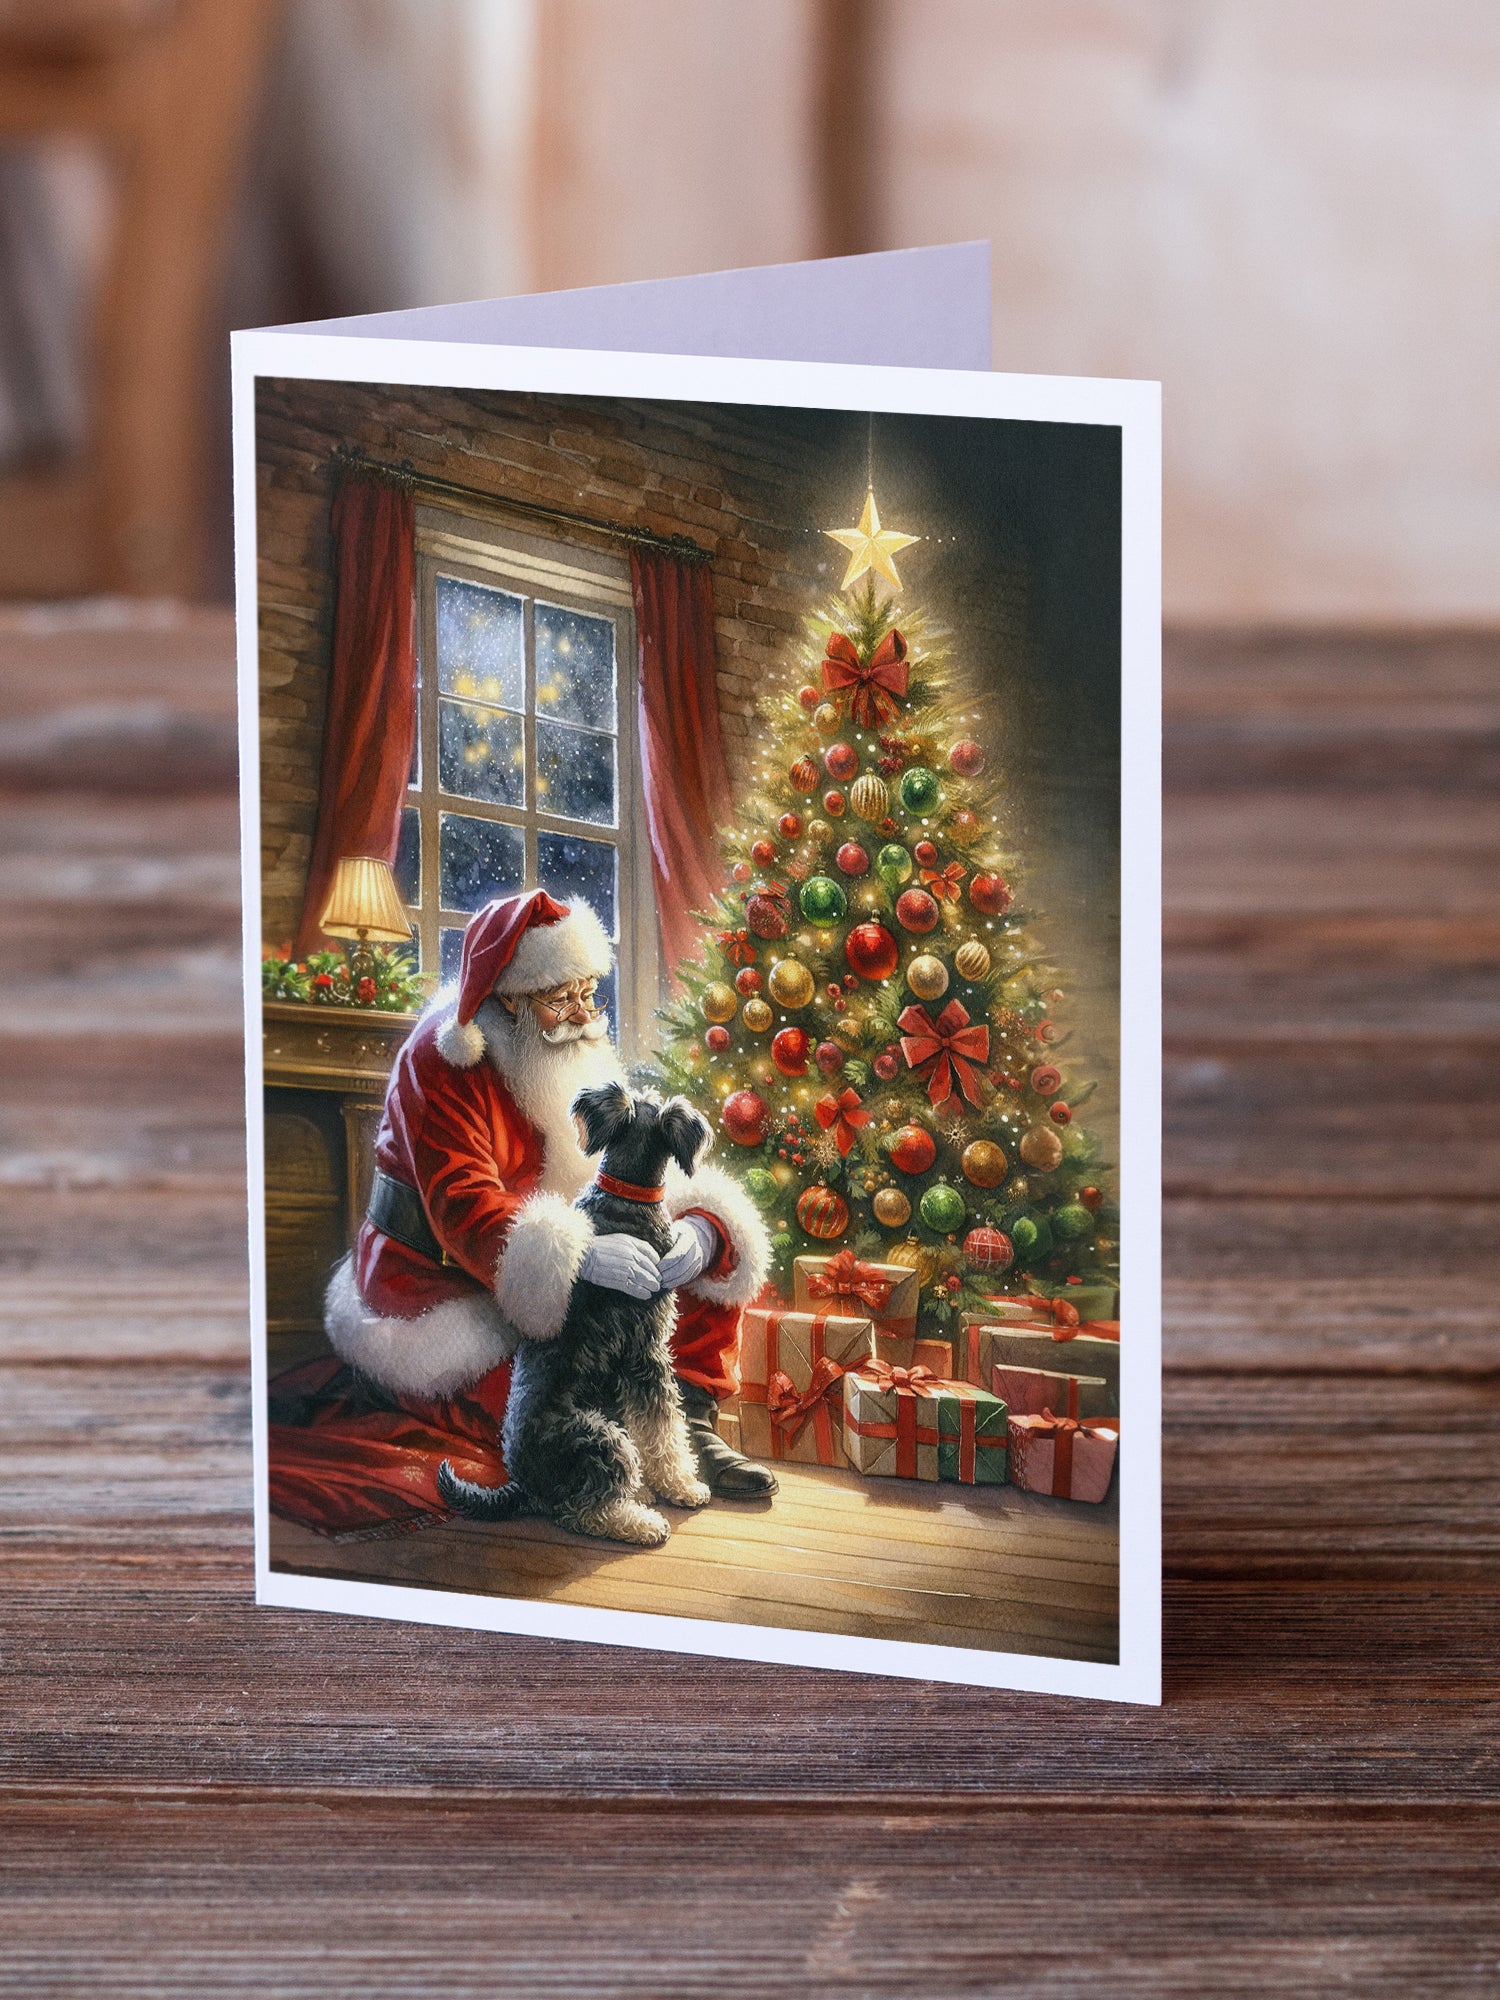 Buy this Schnauzer and Santa Claus Greeting Cards Pack of 8